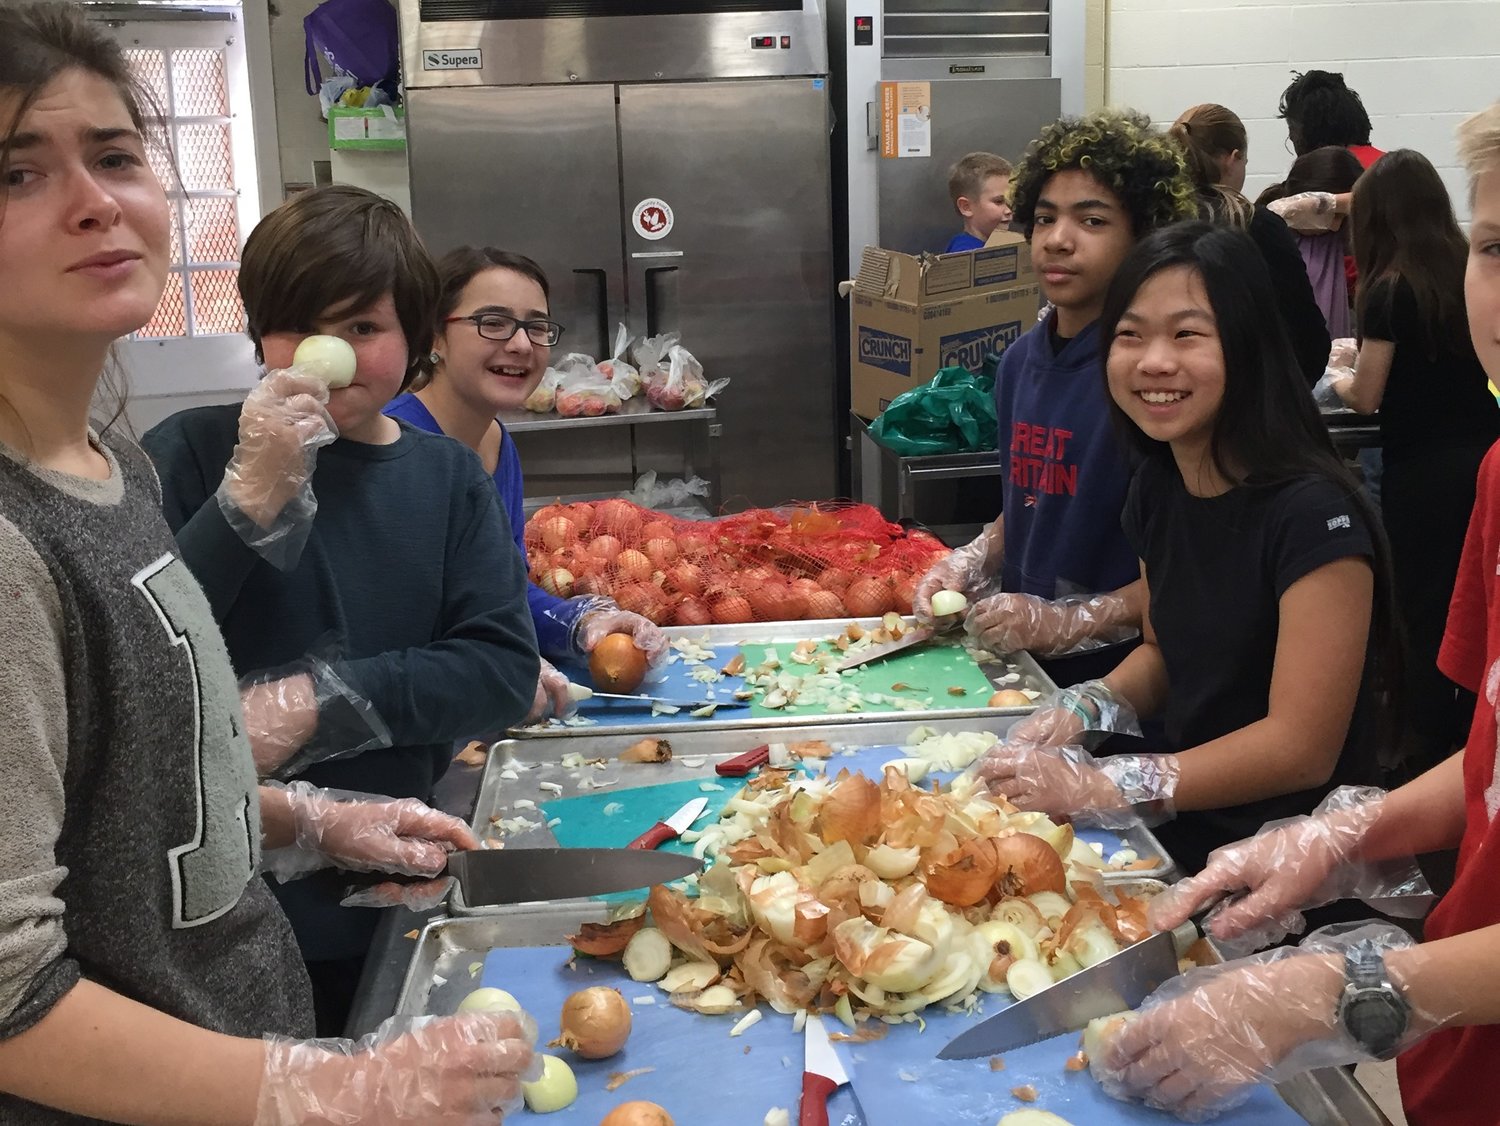 GrowingSOUL participants take food that might otherwise be wasted and turn it into something delicious for all. These students attend the Oneness Family School in Chevy Chase, MD.